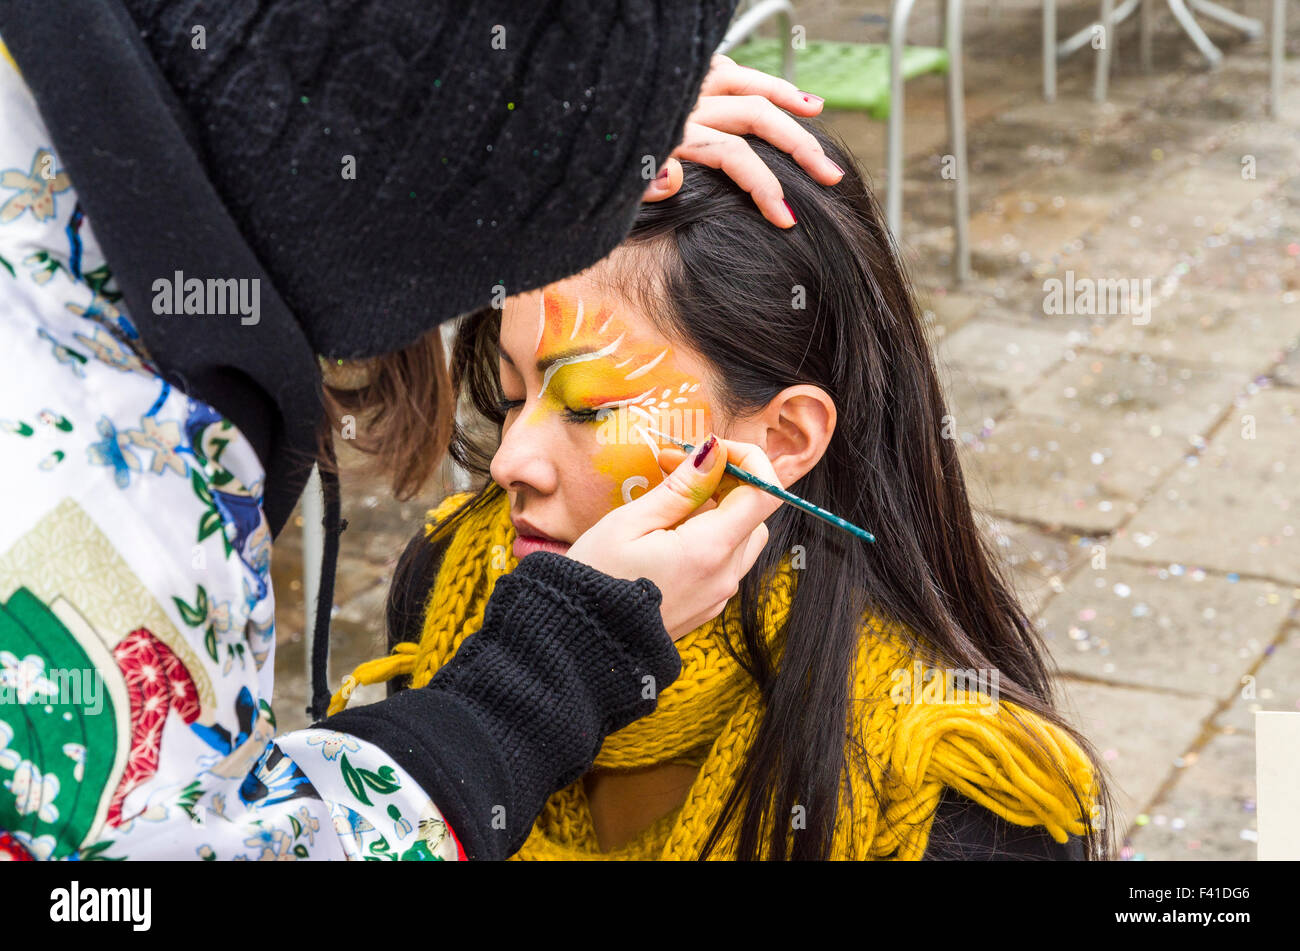 At Carnevale a young woman is getting a face painting Stock Photo